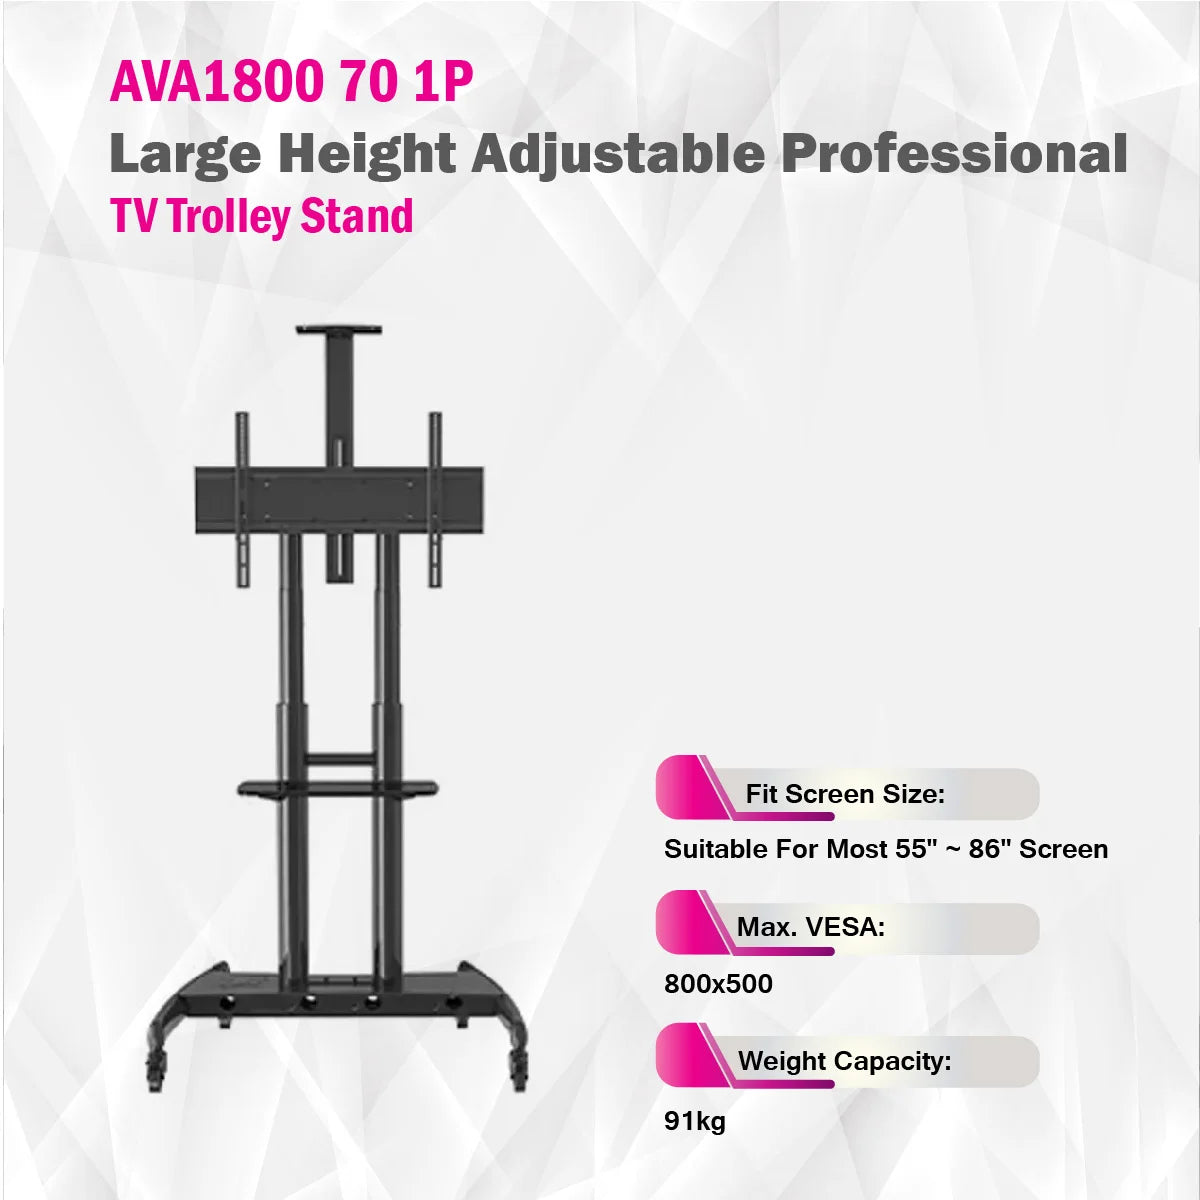 Skilltech -AVA1800 70 1P - Large Height Adjustable Professional TV Trolley Stand